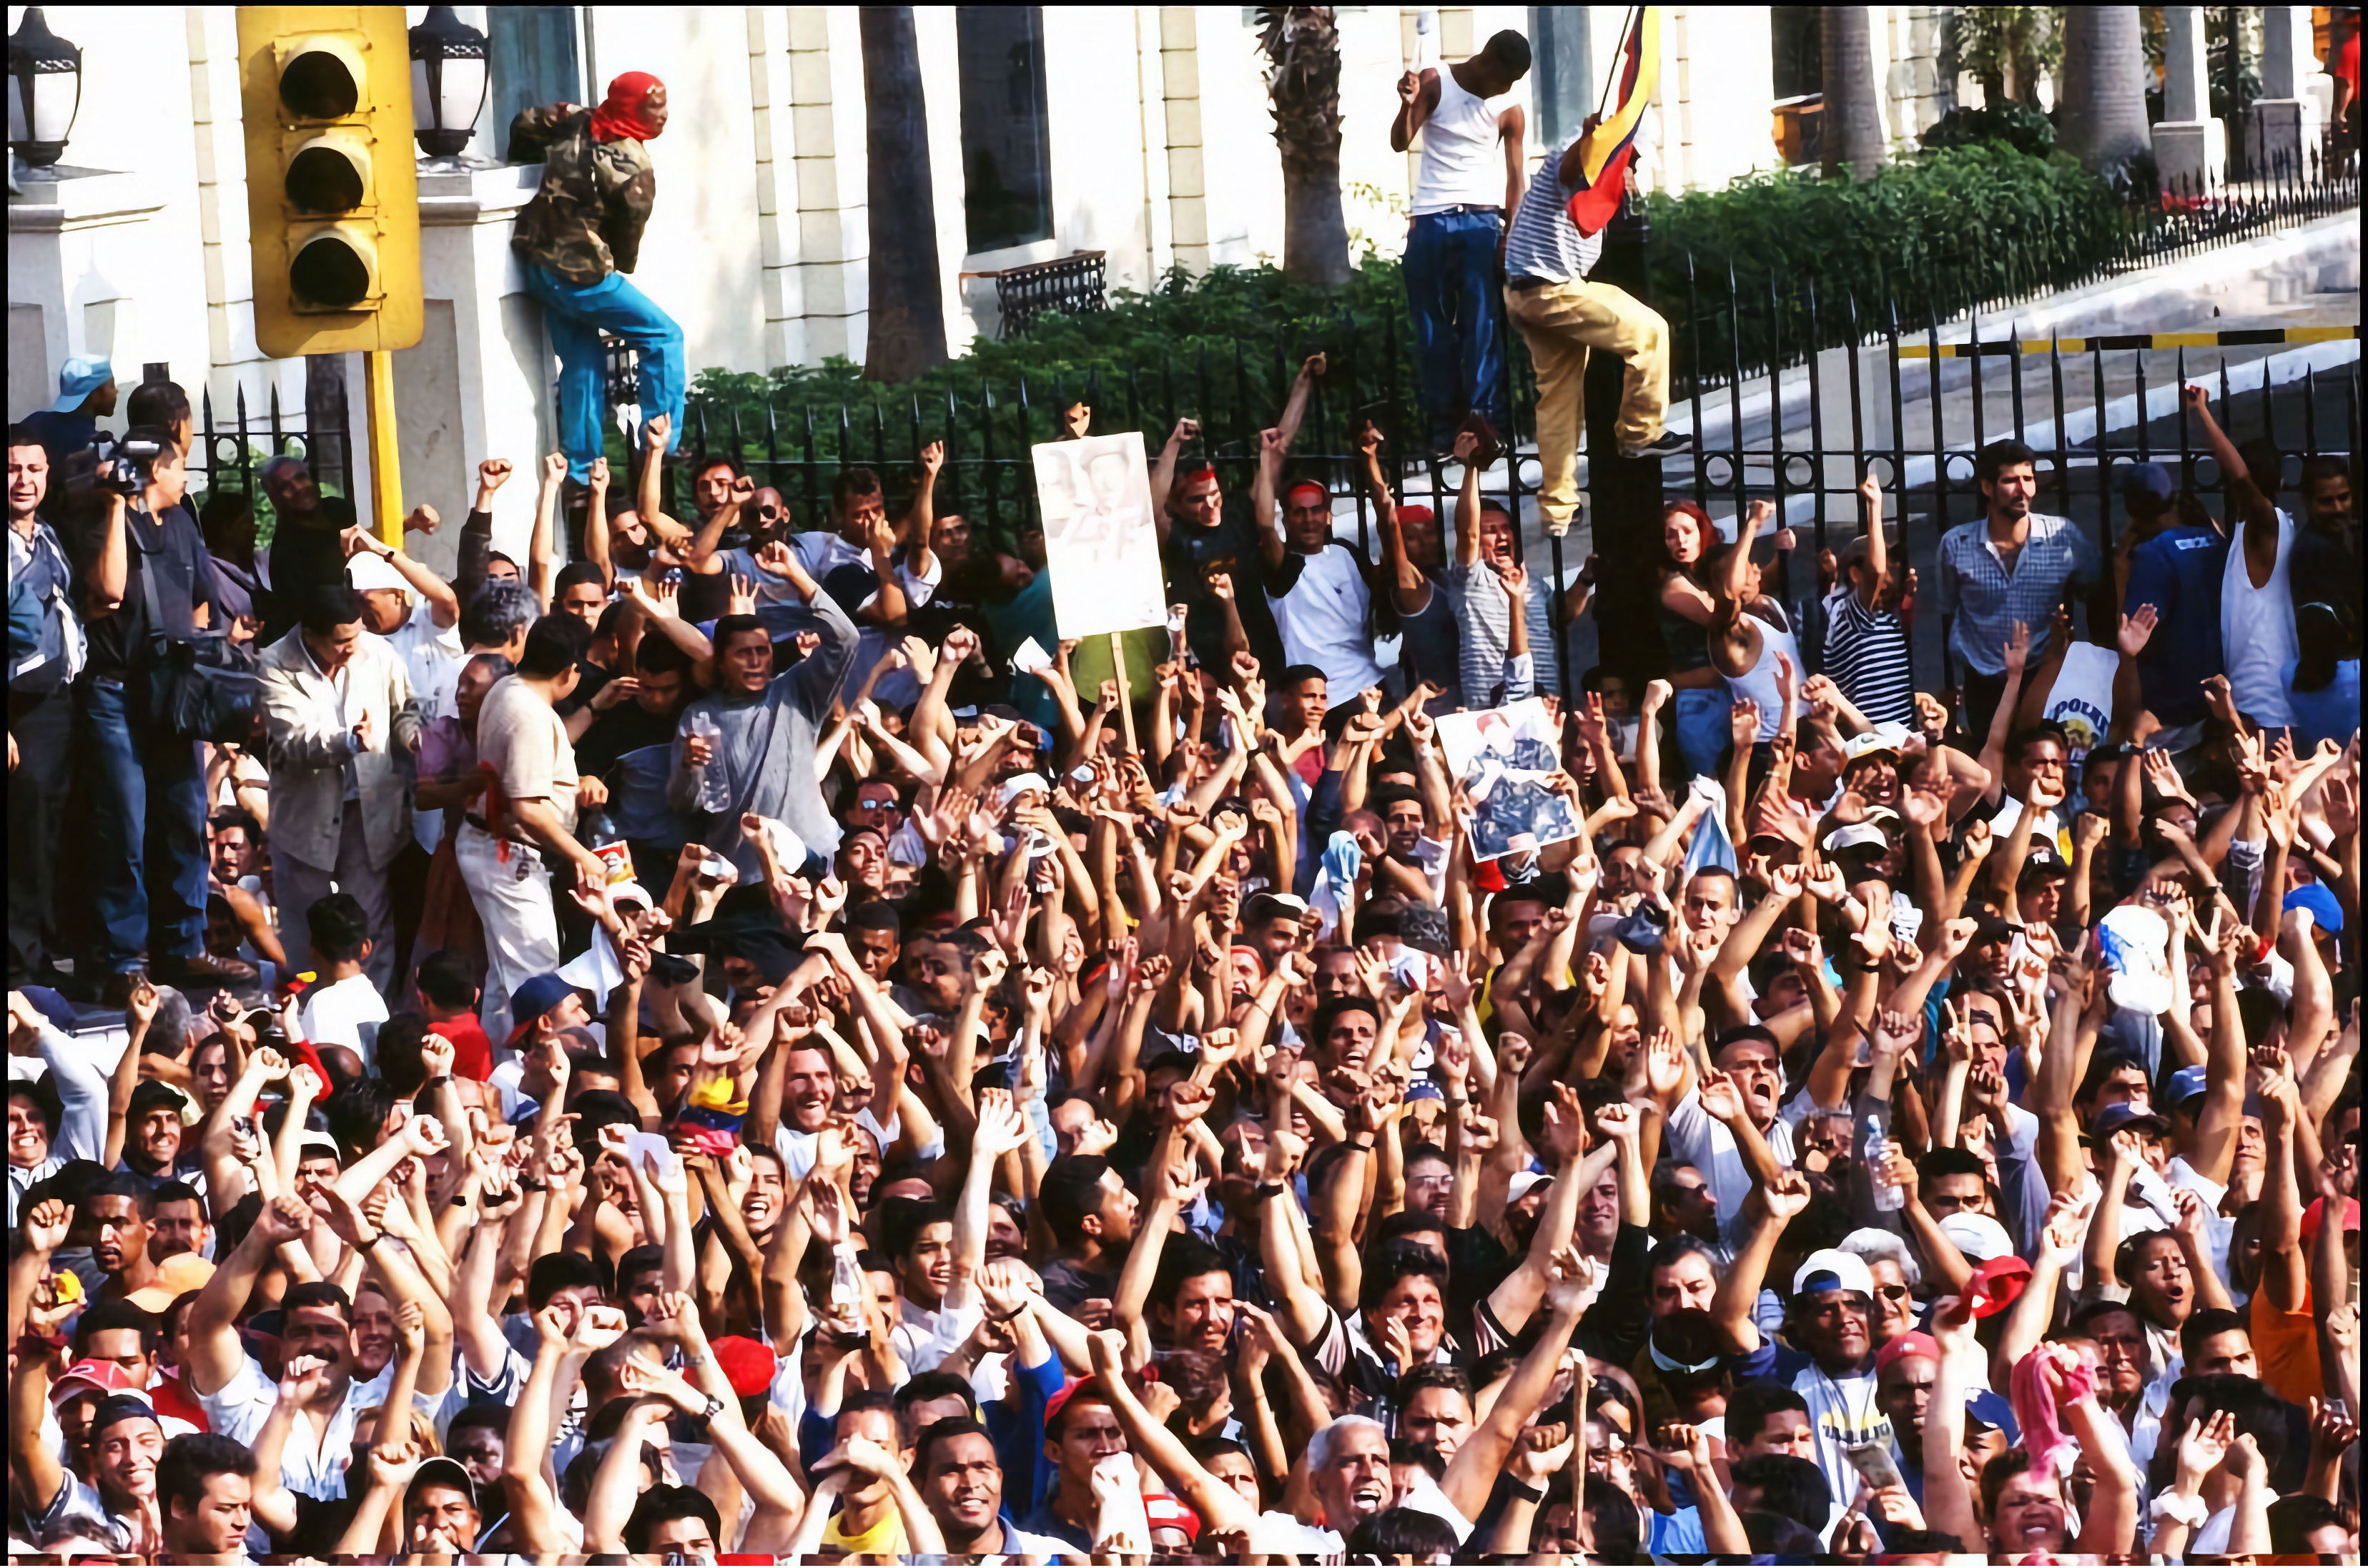 Venezuela, April 13, 2002: The historic feat of the Revolutionary People